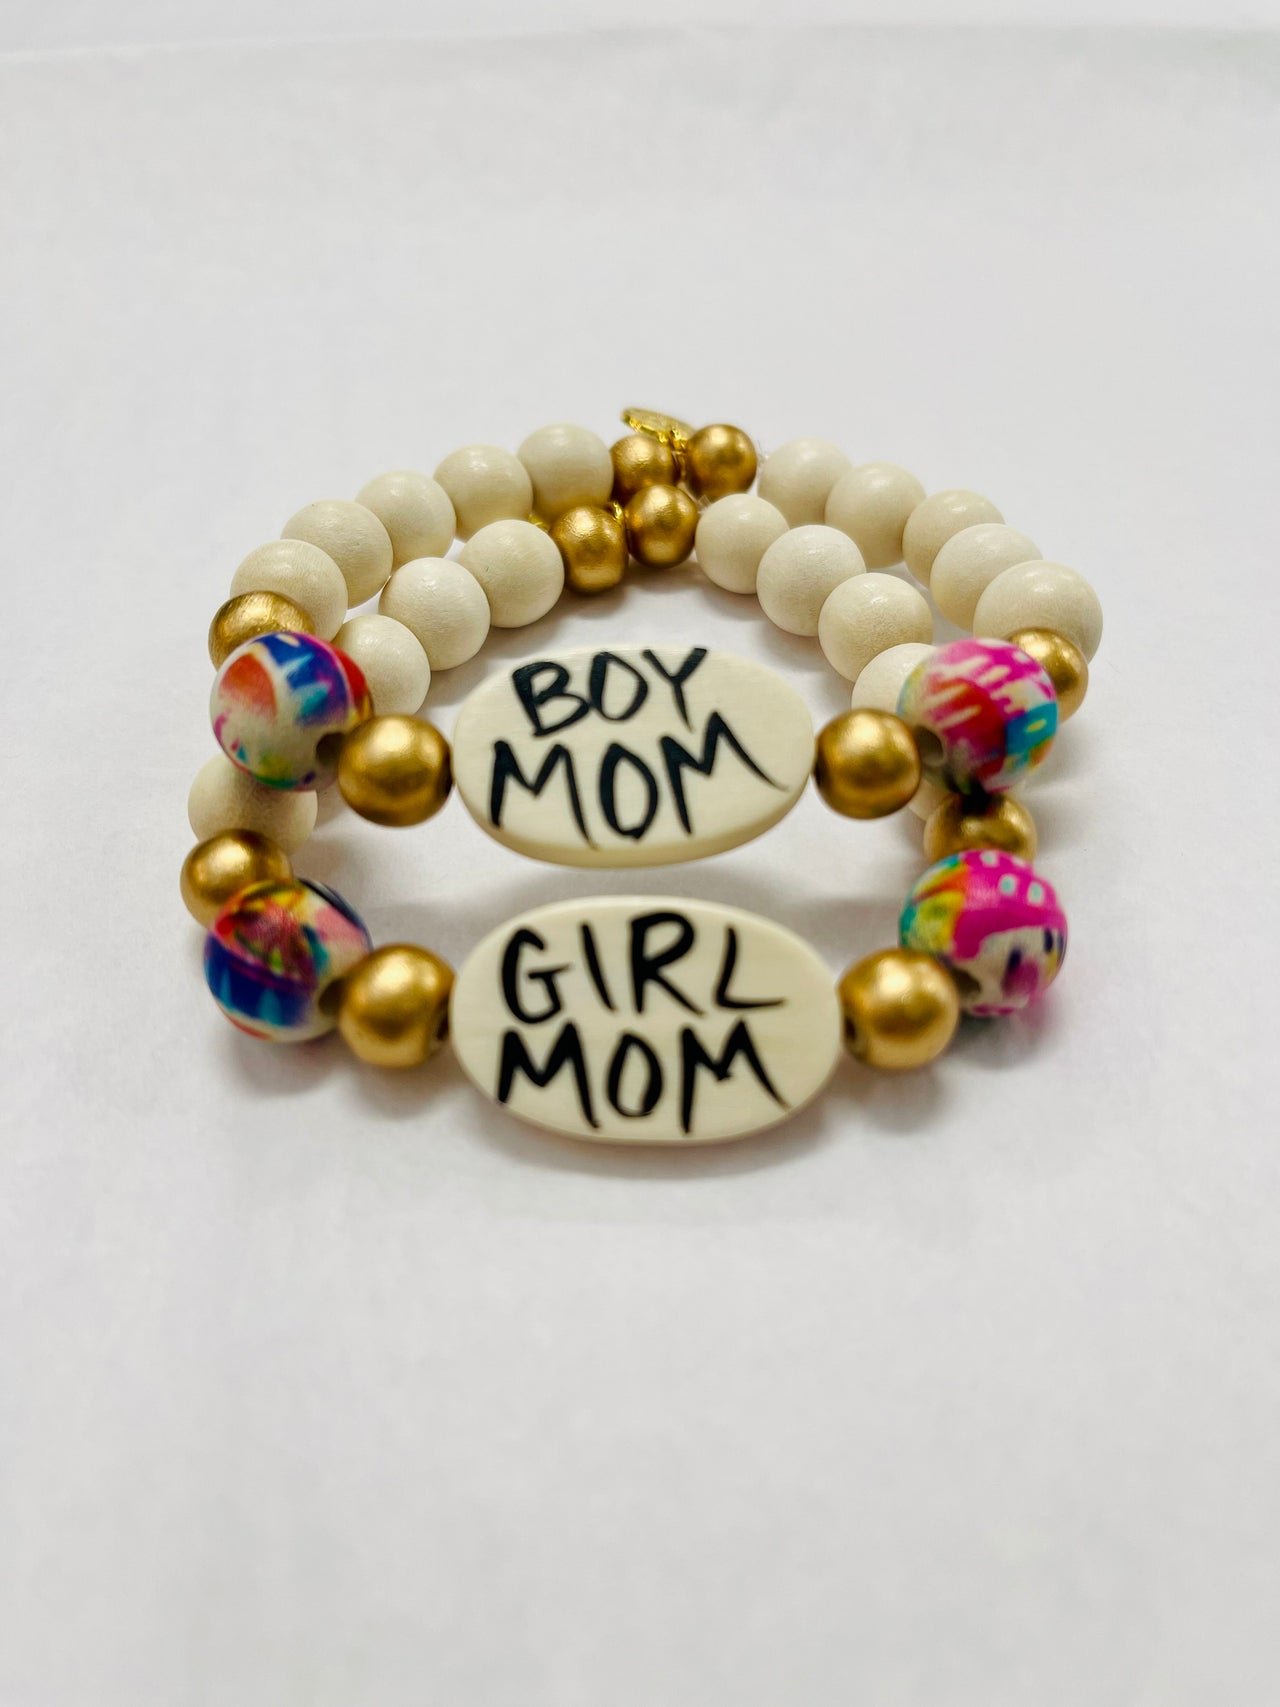 Affirmation Word Beaded Bracelets Inspirational - Abstract - Large Oval: Boy Mom